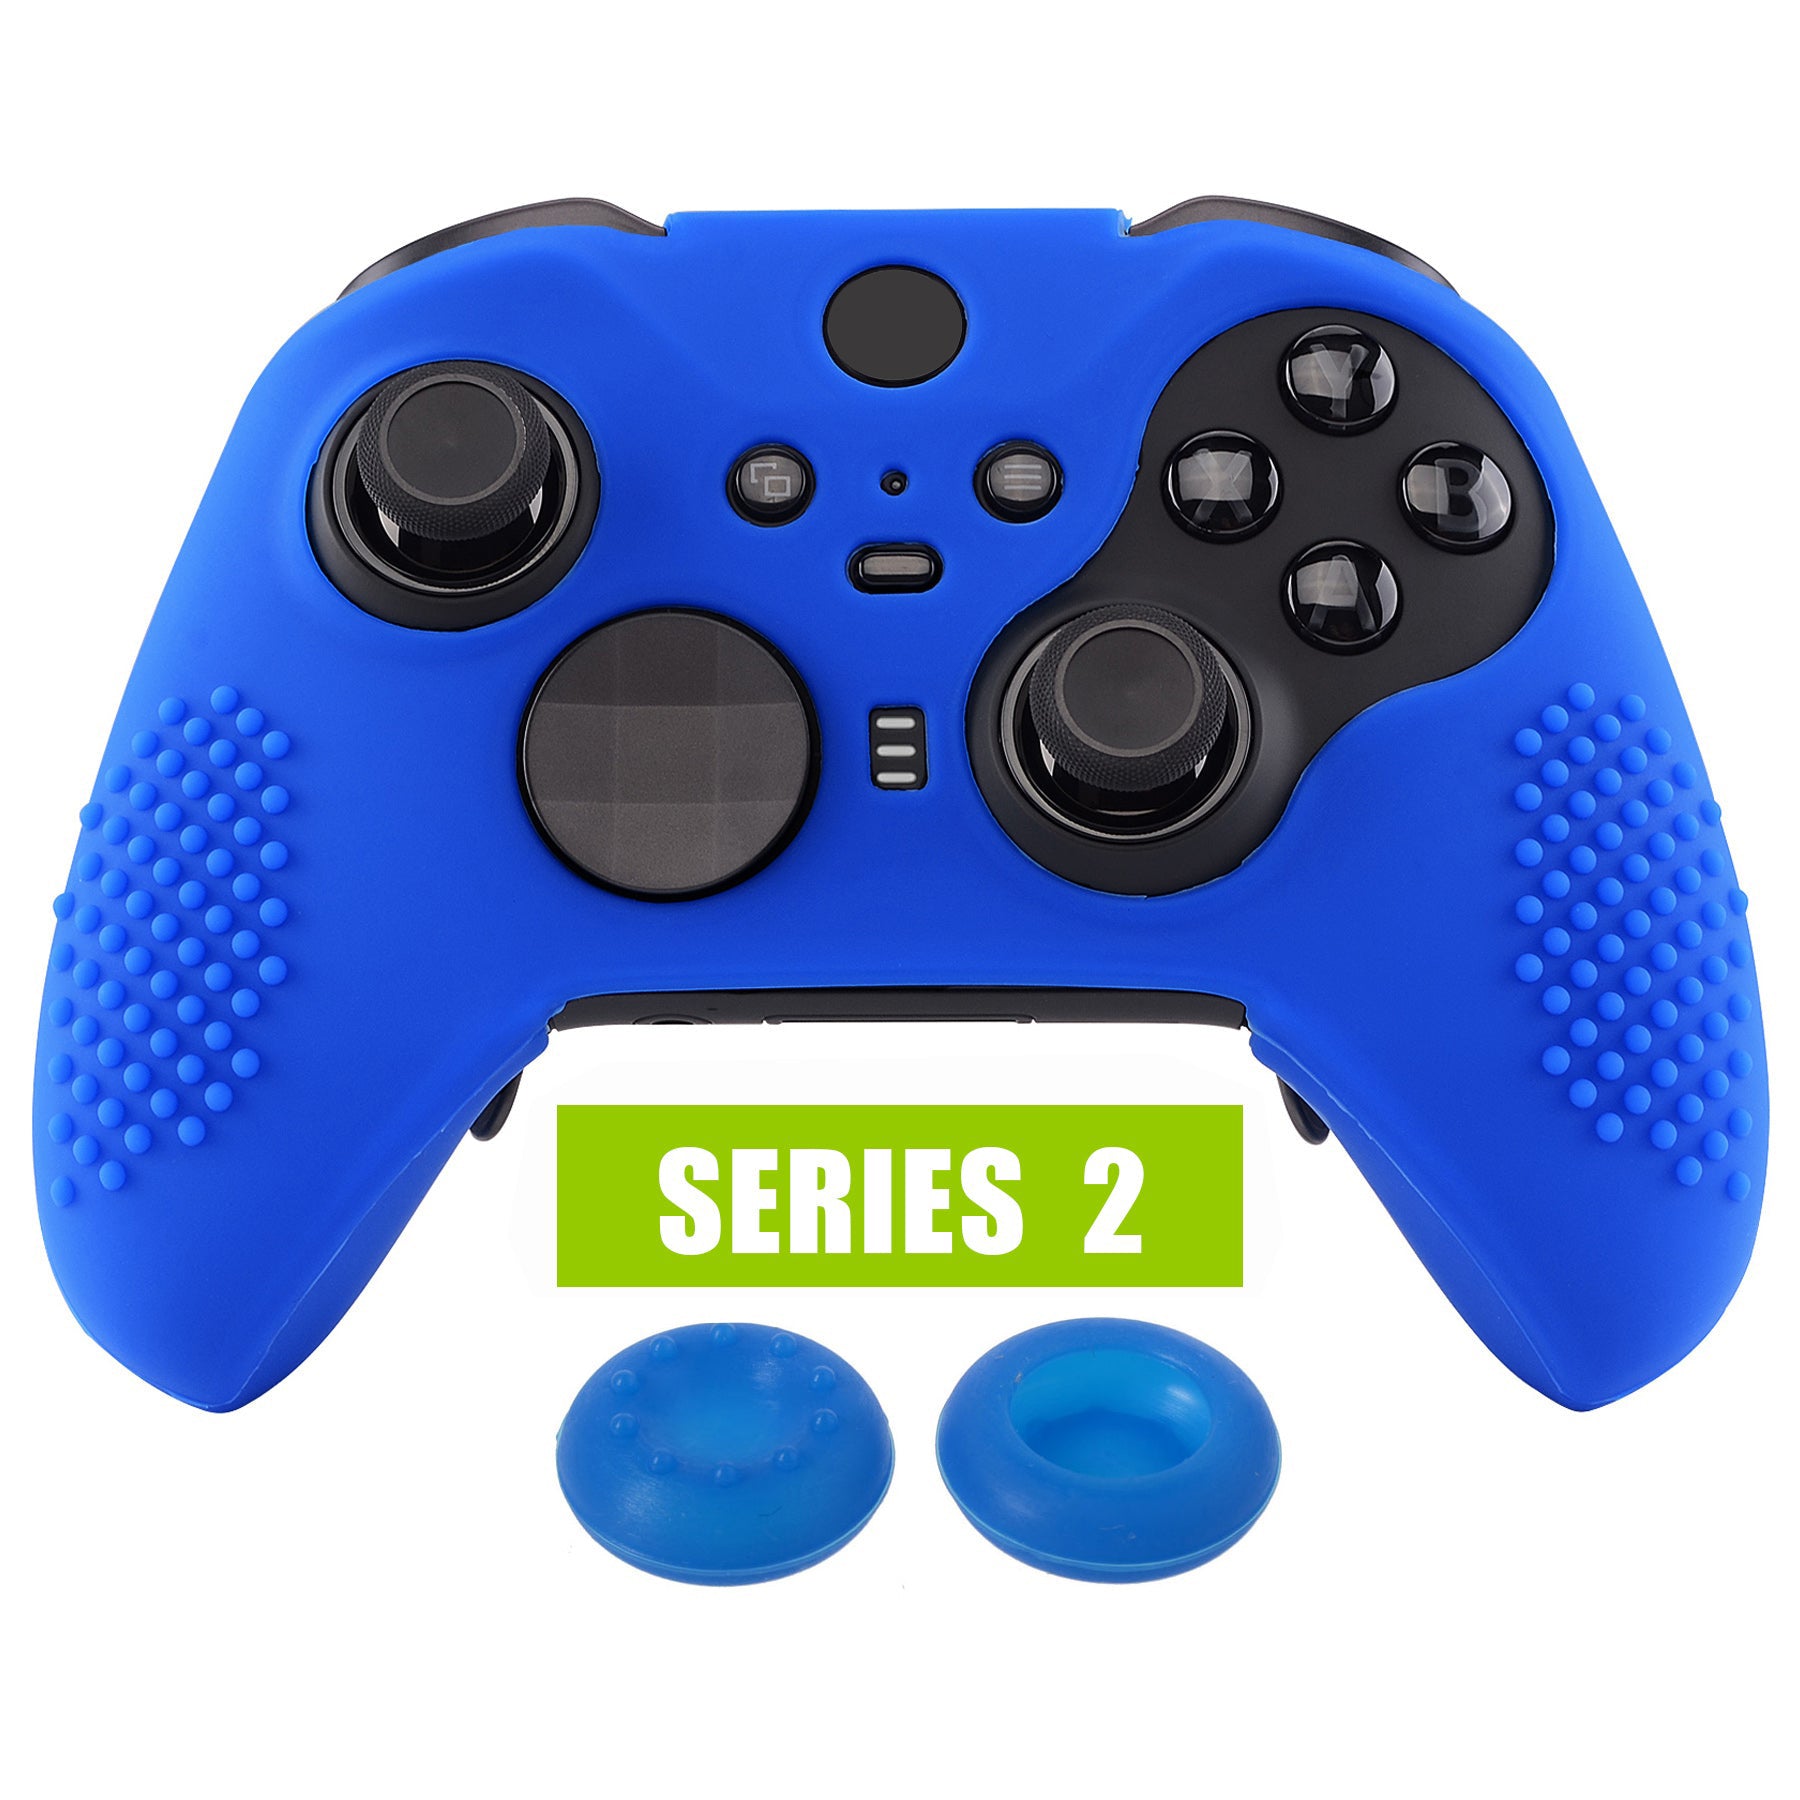 Blue Soft Anti-Slip Silicone Cover Skins, Controller Protective Case for New Xbox One Elite Series 2 with Thumb Grips Analog Caps -XBOWP0047GC eXtremeRate